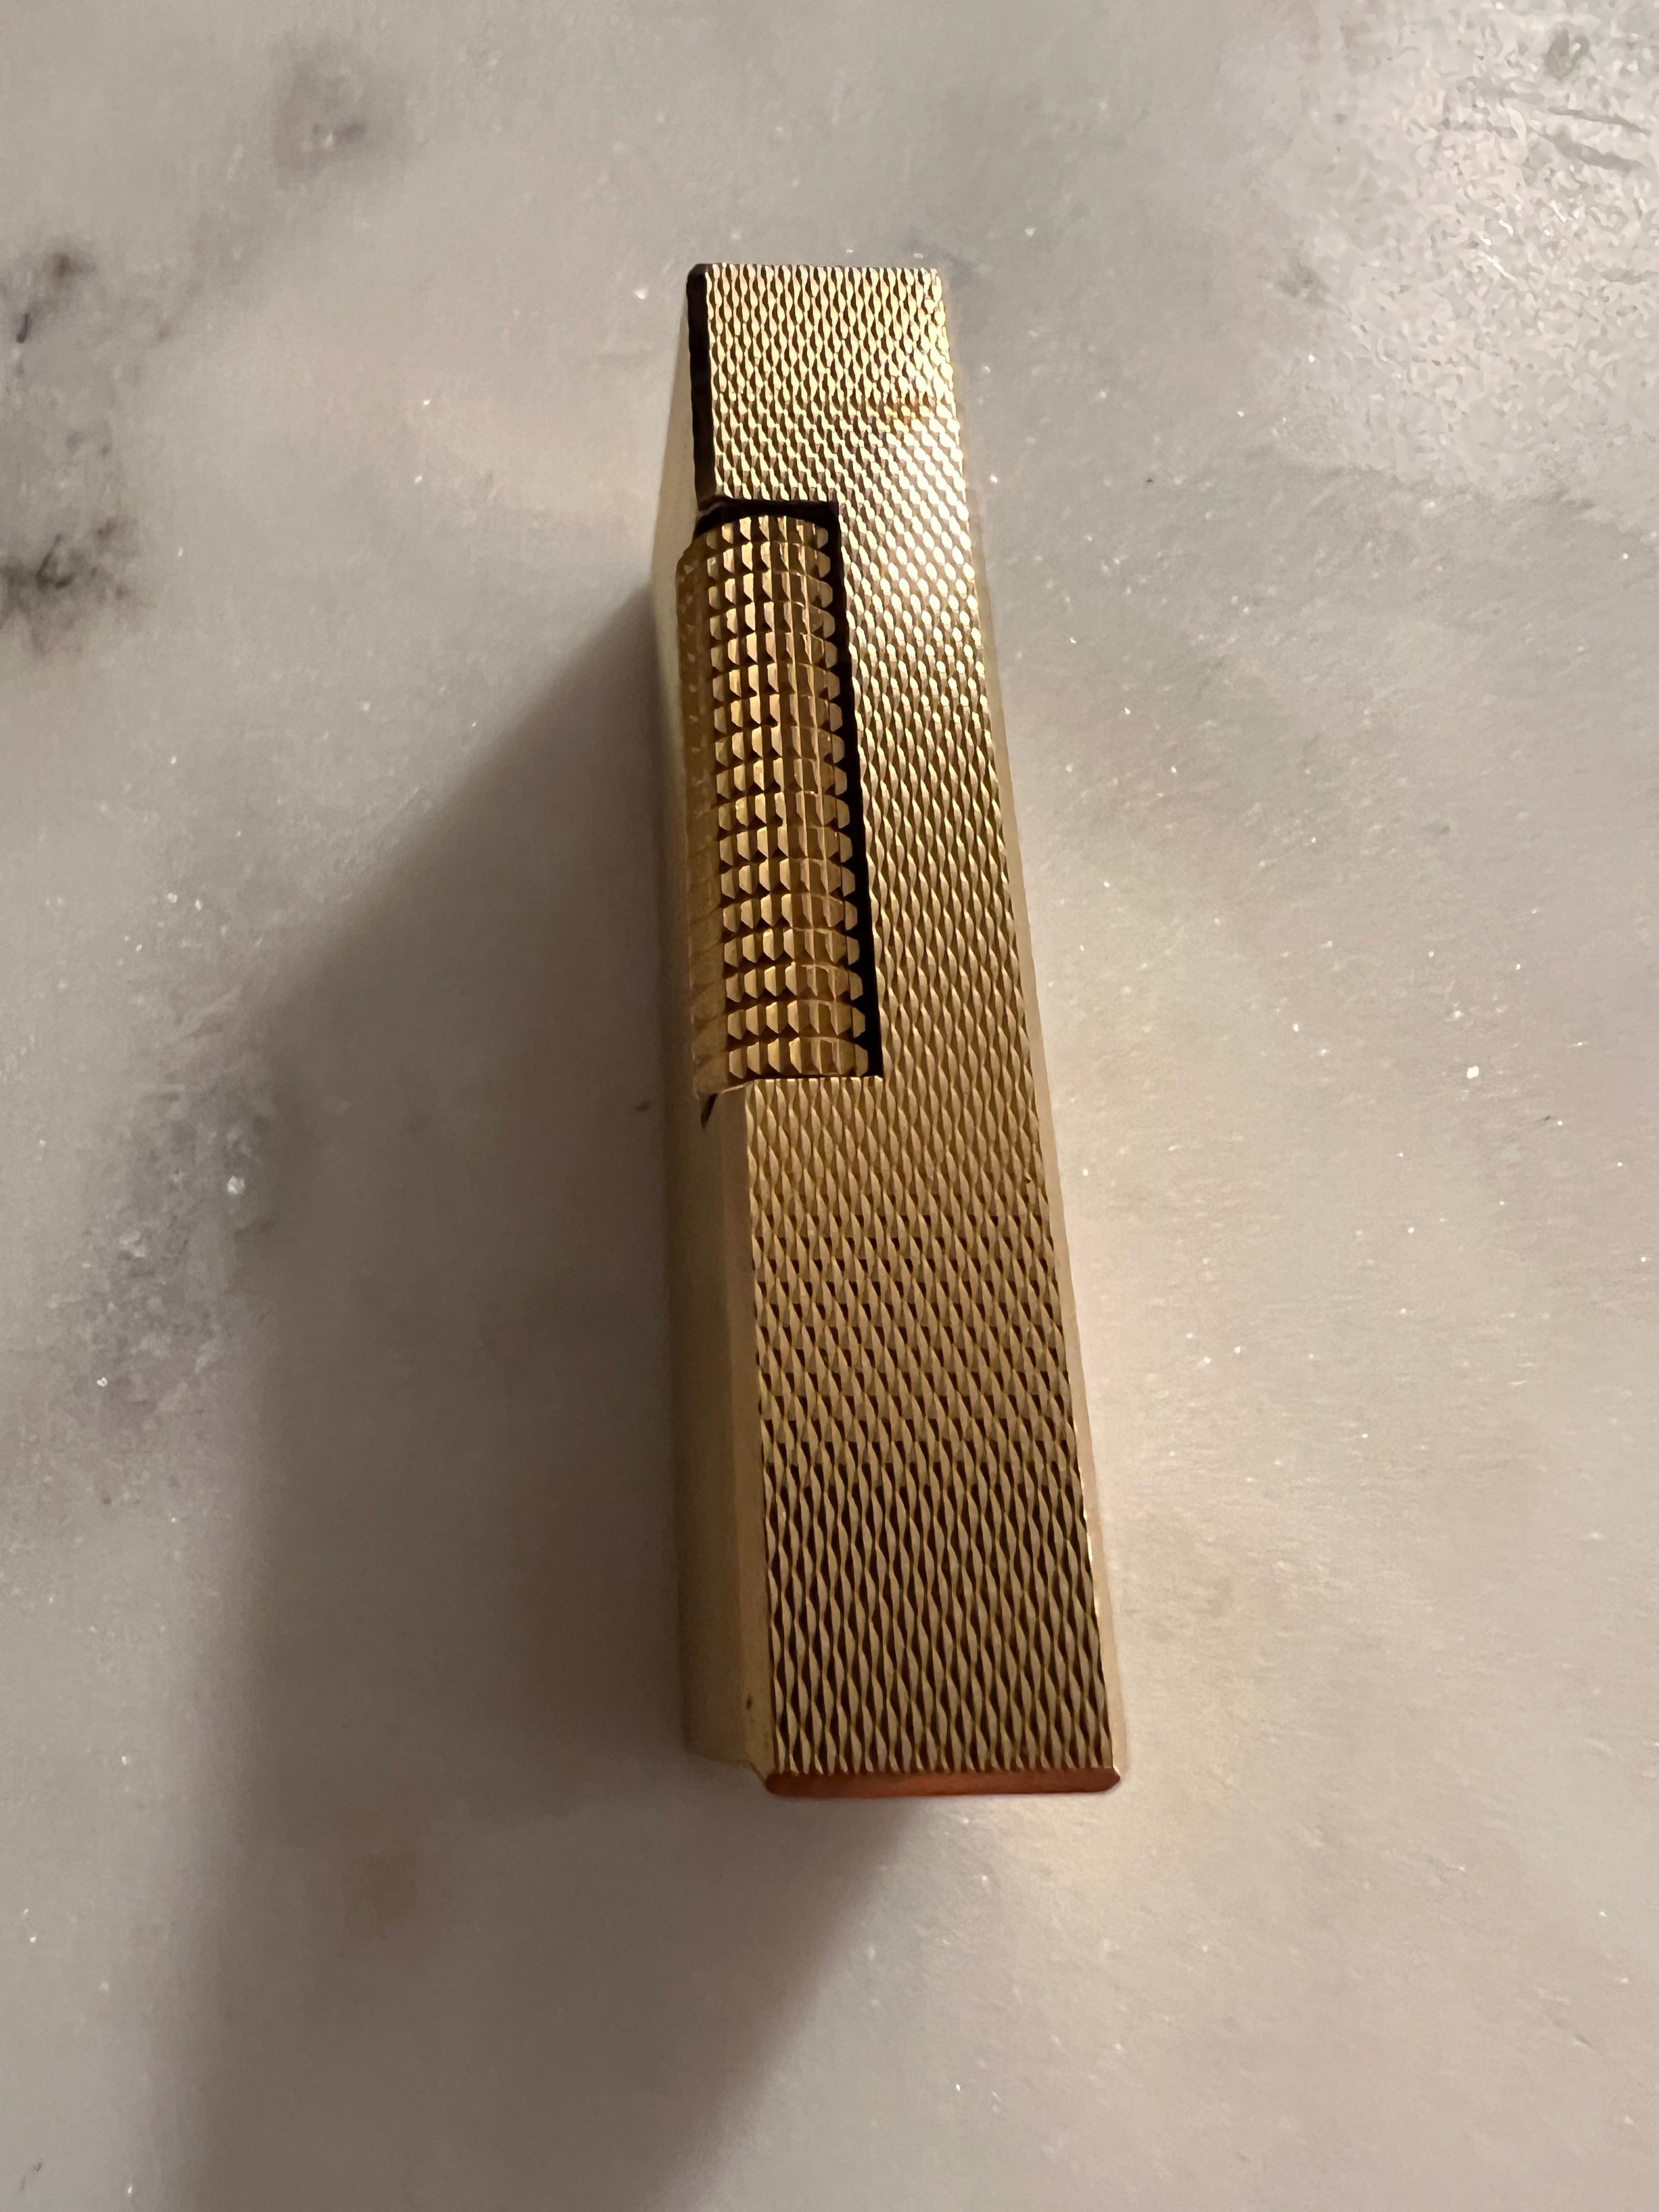 The James Bond Iconic and Rare Vintage Dunhill Gold and Swiss Made Lighter 6